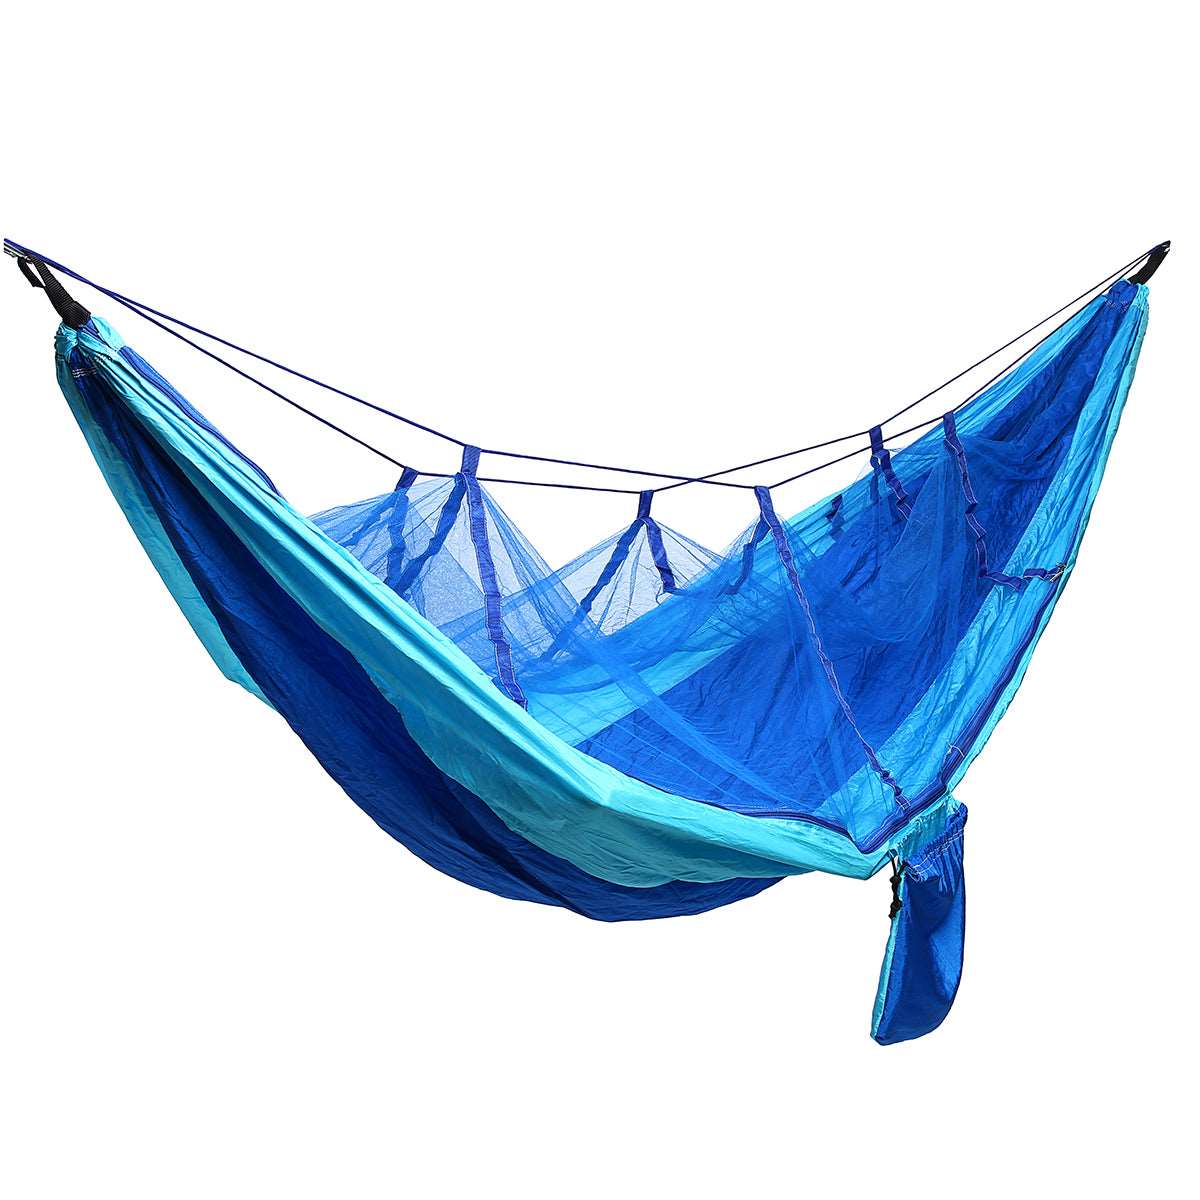 Ultralight Comfortable Hammock! Perfect for a Beach Swing, romantic rocking Bed or the Outdoors. So many great uses, such as; Backpacking, Survival or Travel. 